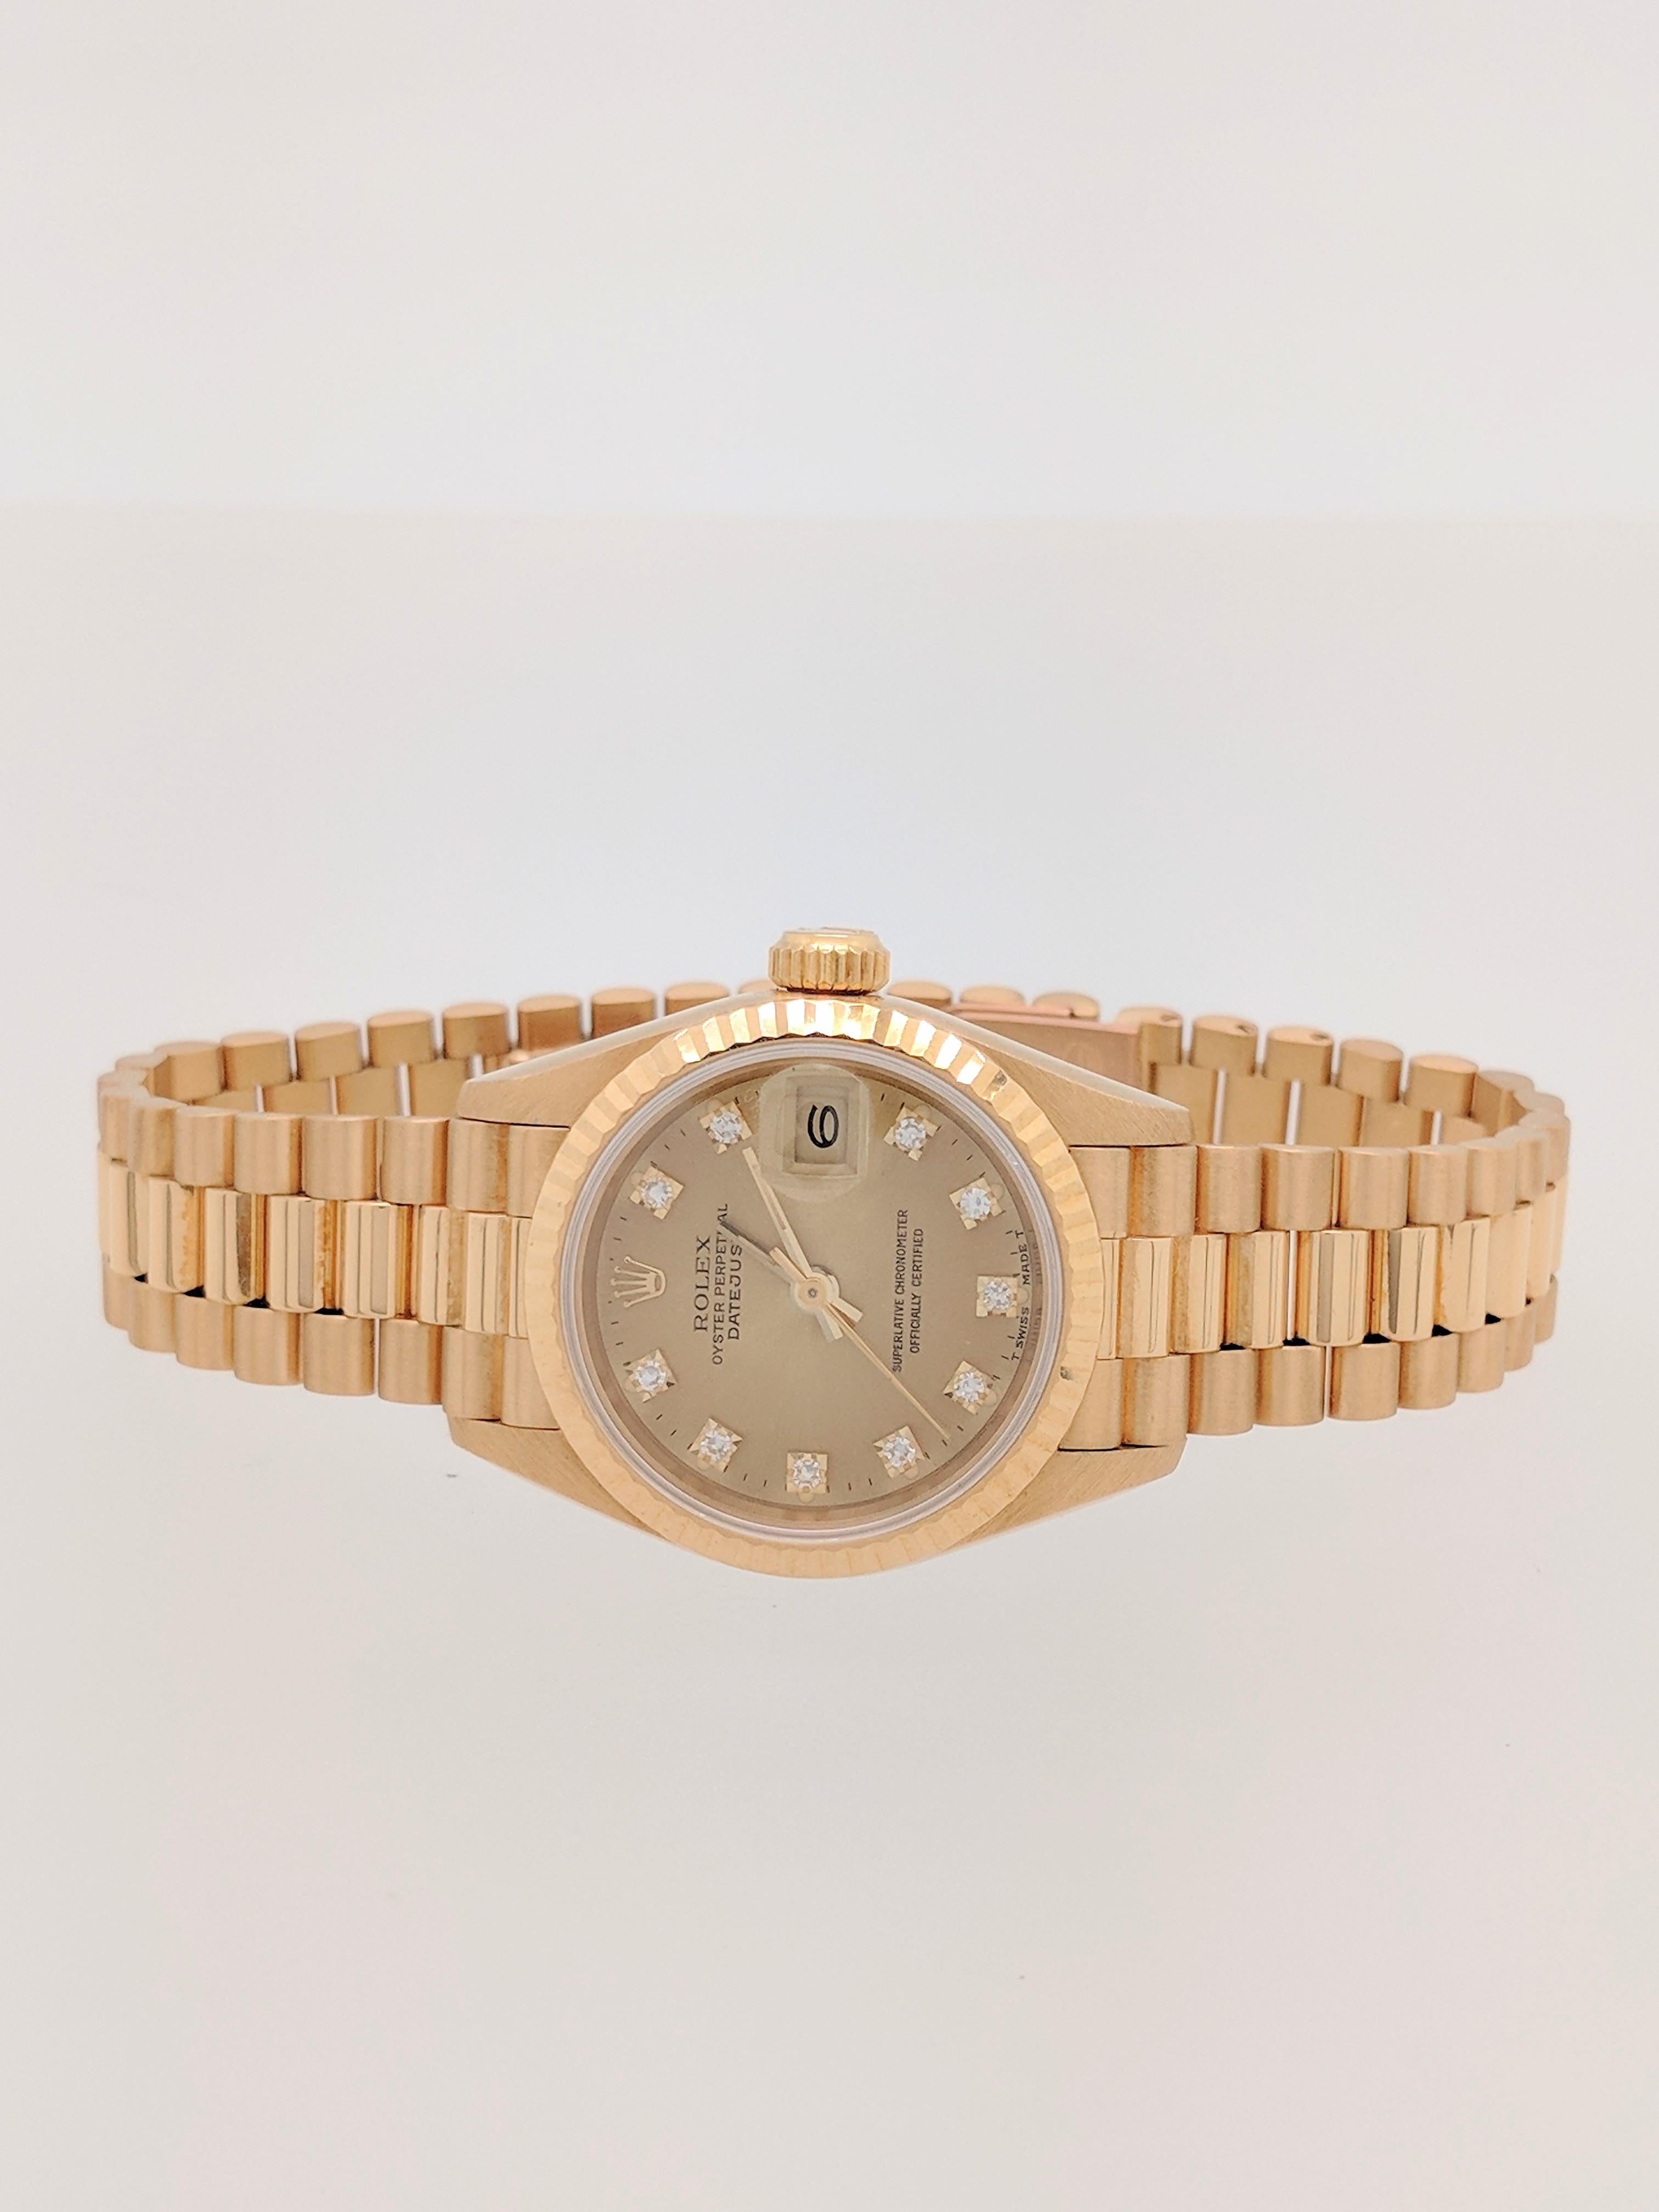 Rolex Ladies DateJust President Original Diamond Dial Watch 69178

You are viewing an authentic Rolex DateJust President 69178 Ladies Watch.

Watch features a 18k yellow gold jubilee bracelet with a Fliplock clasp, a matching fluted bezel and 26mm